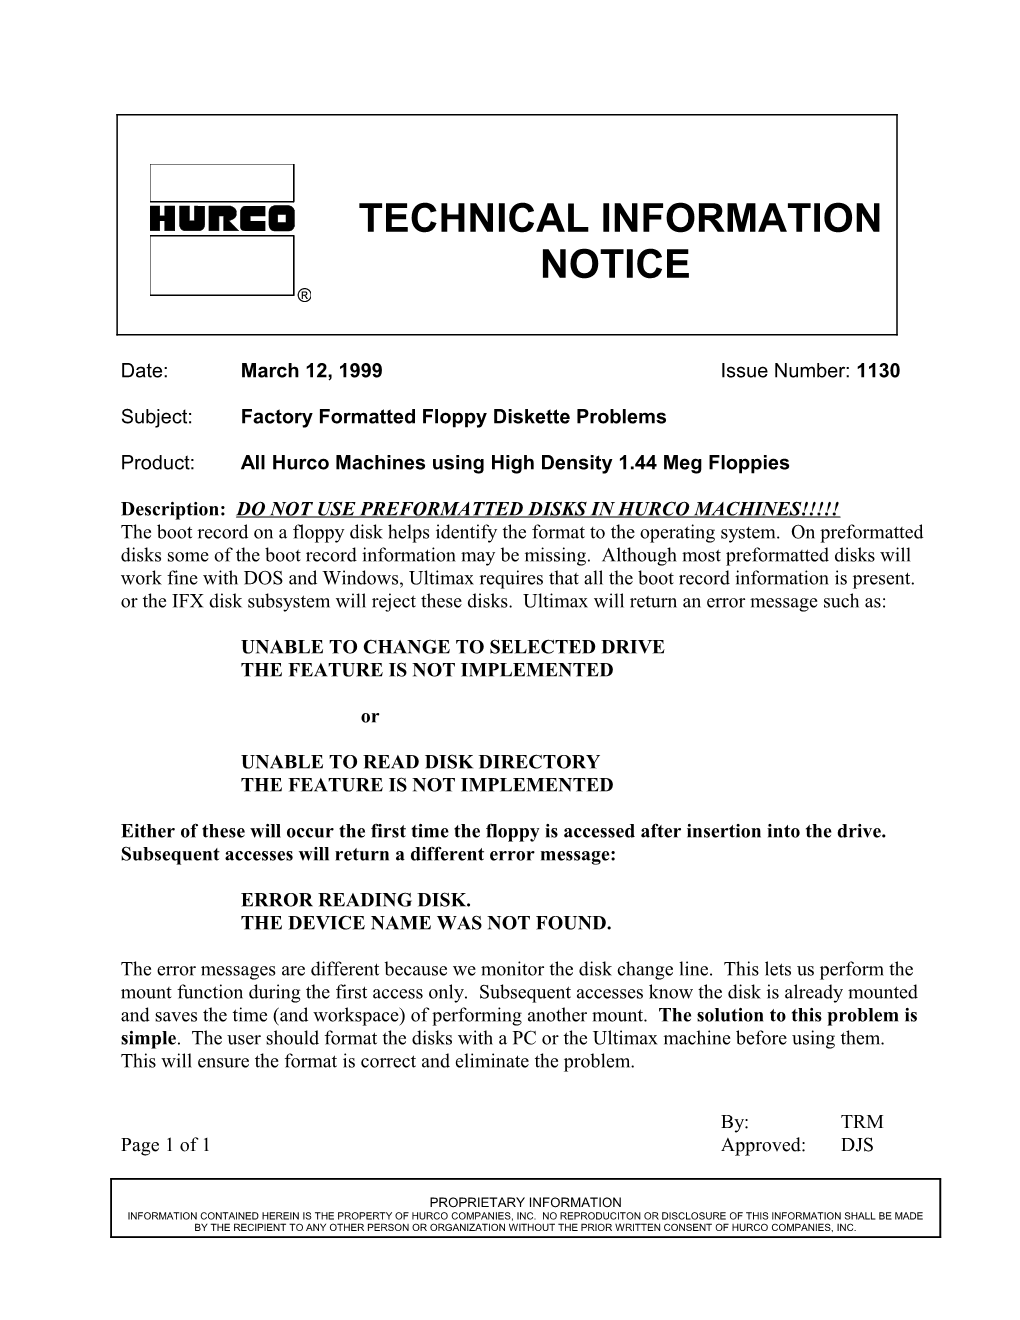 Subject: Factory Formatted Floppy Diskette Problems